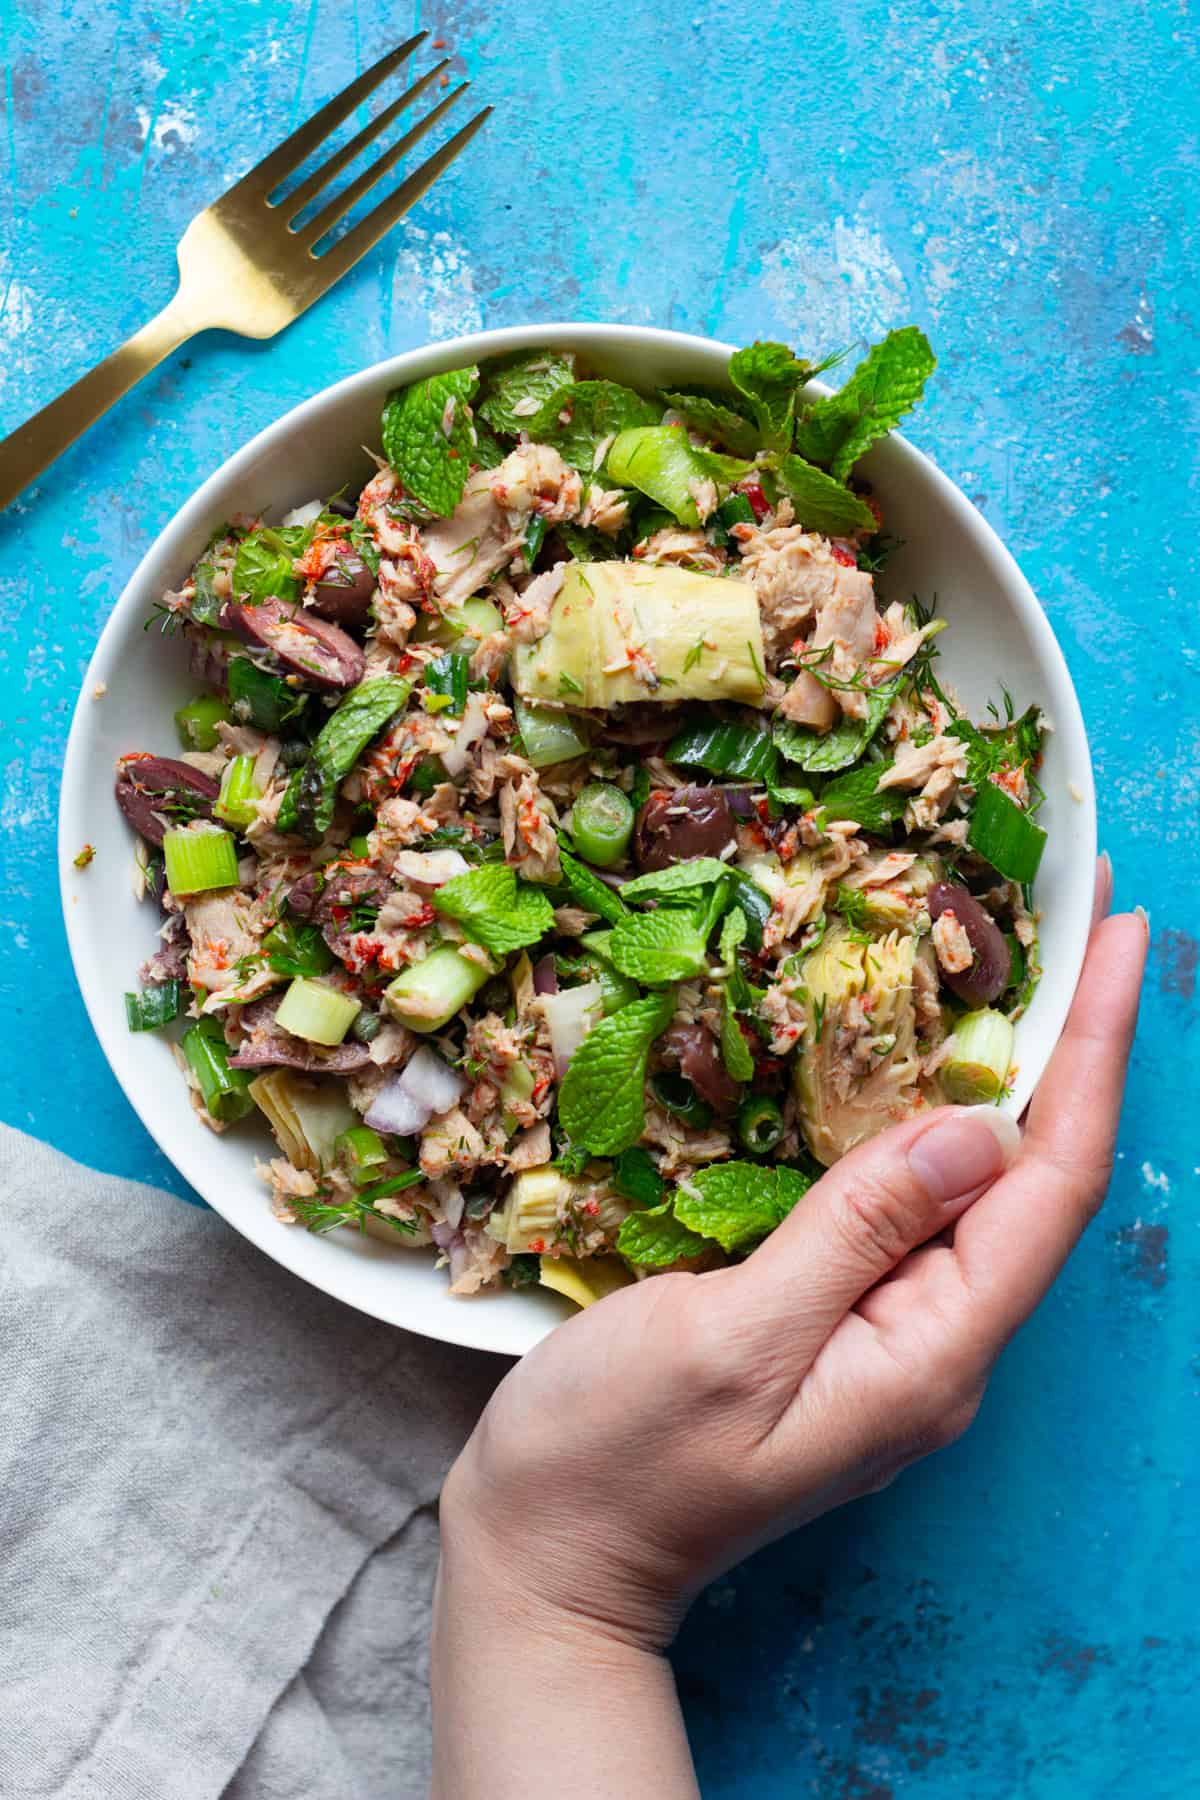 Ditch the mayonnaise and try this Mediterranean tuna salad. This no mayo tuna salad is packed with delicious ingredients like artichokes and herbs. 